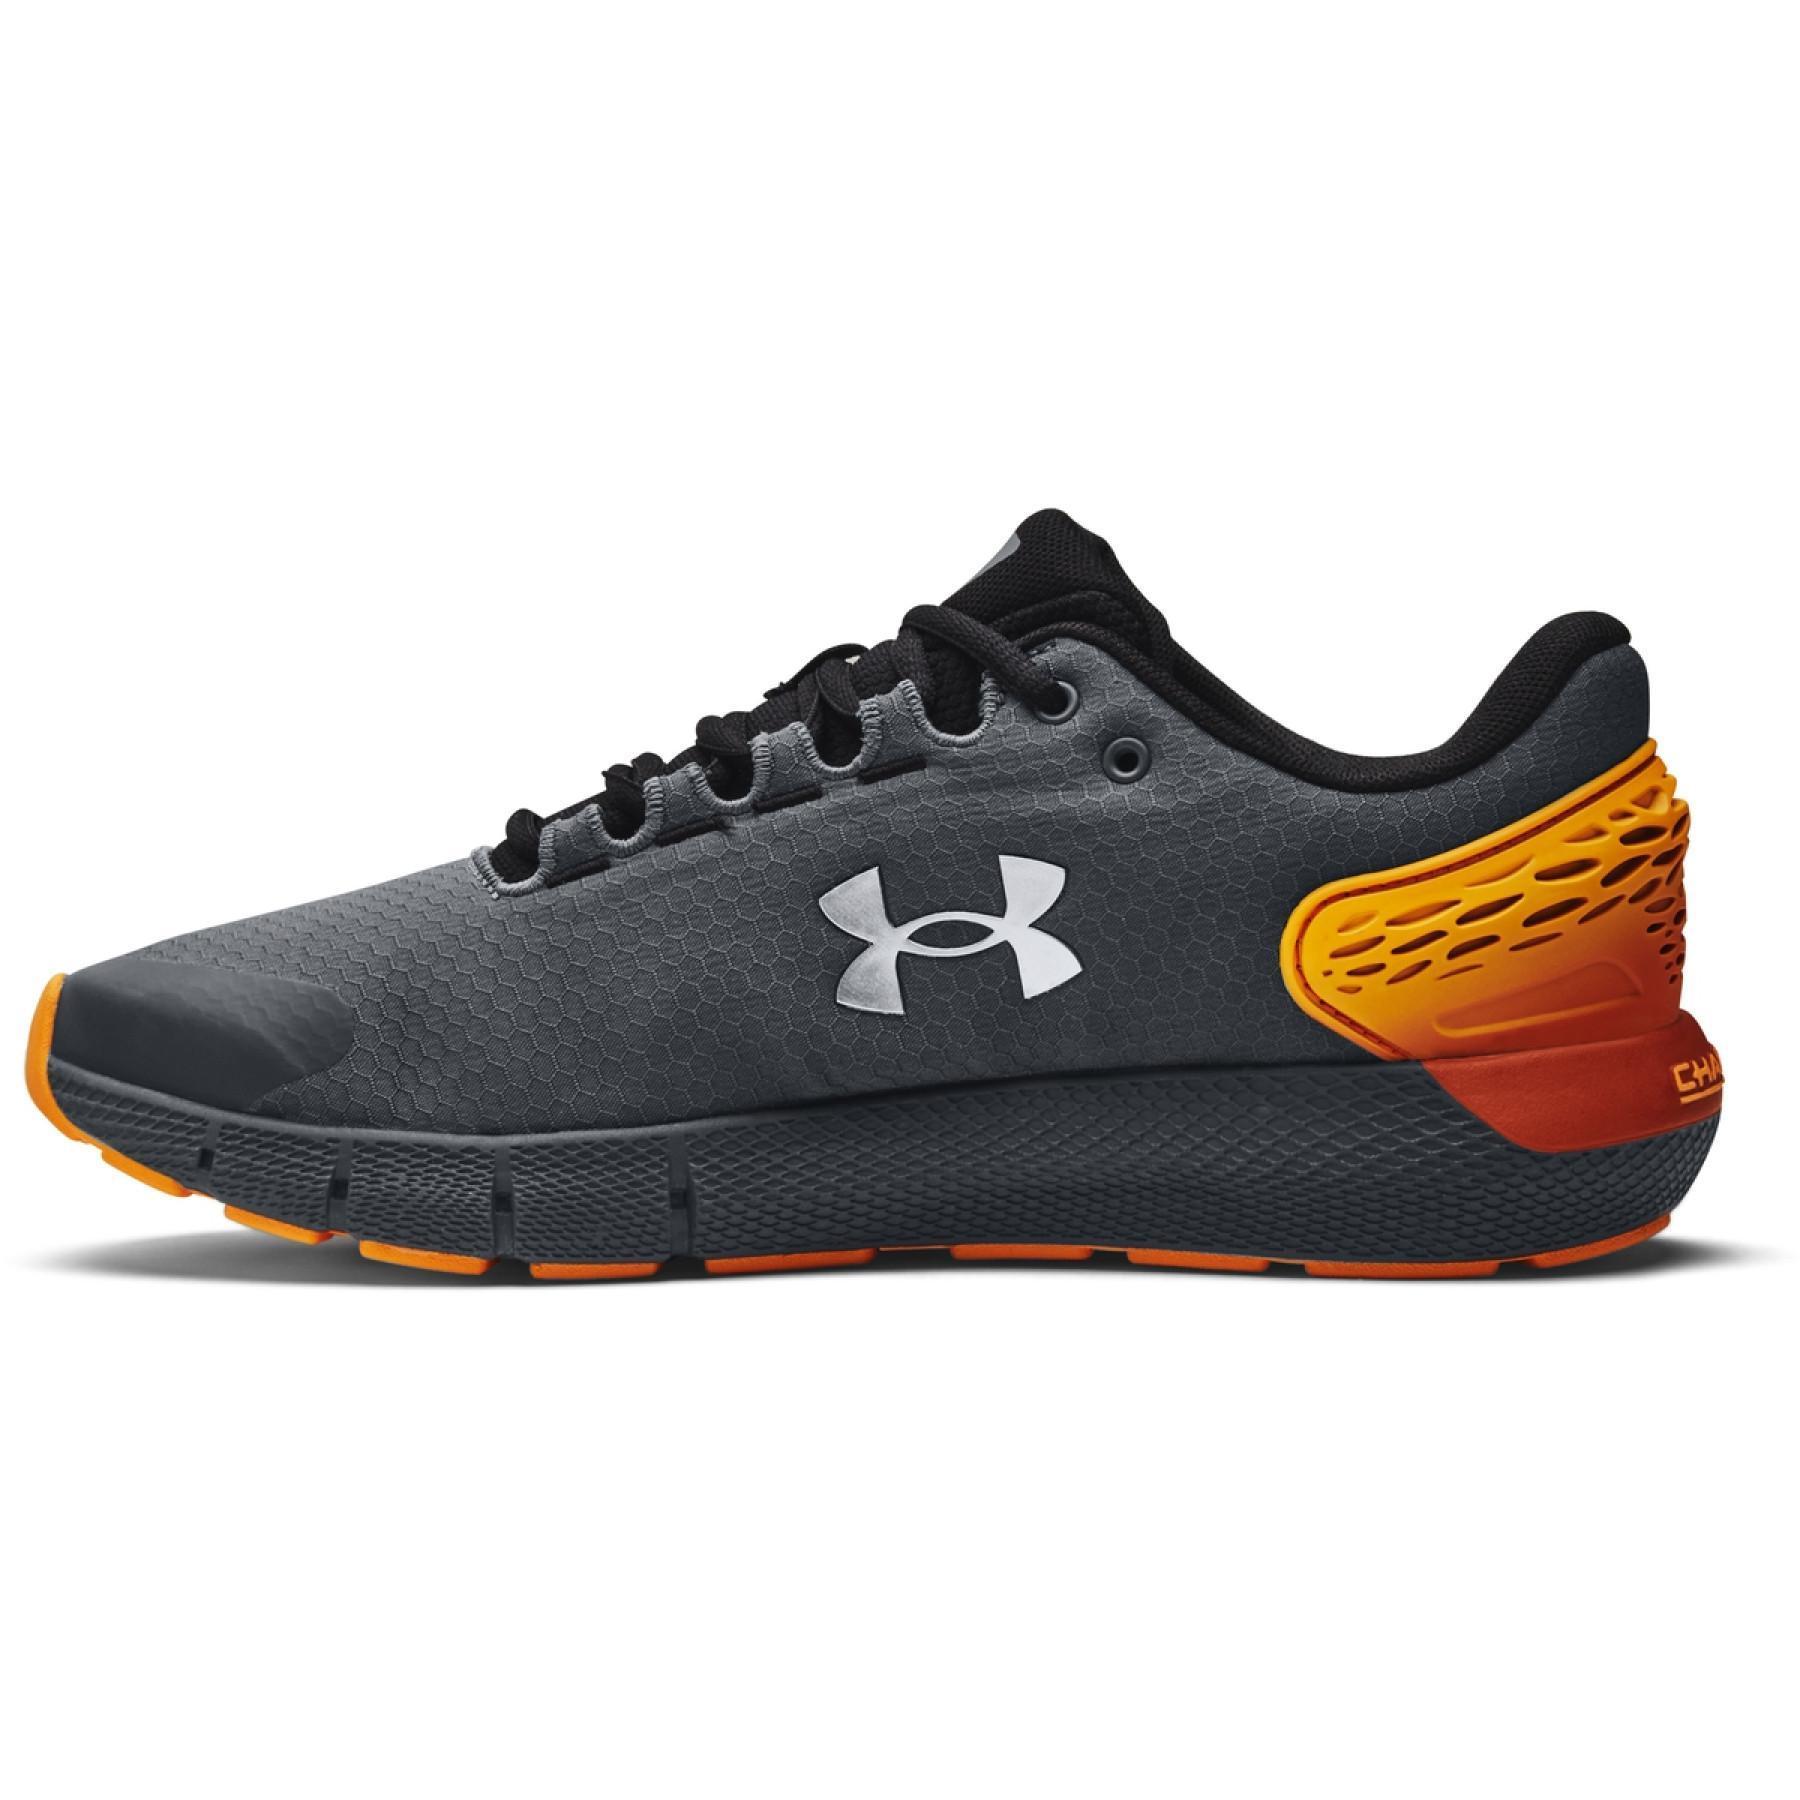 Zapatillas para correr Under Armour Charged Rogue 2 ColdGear Infrared